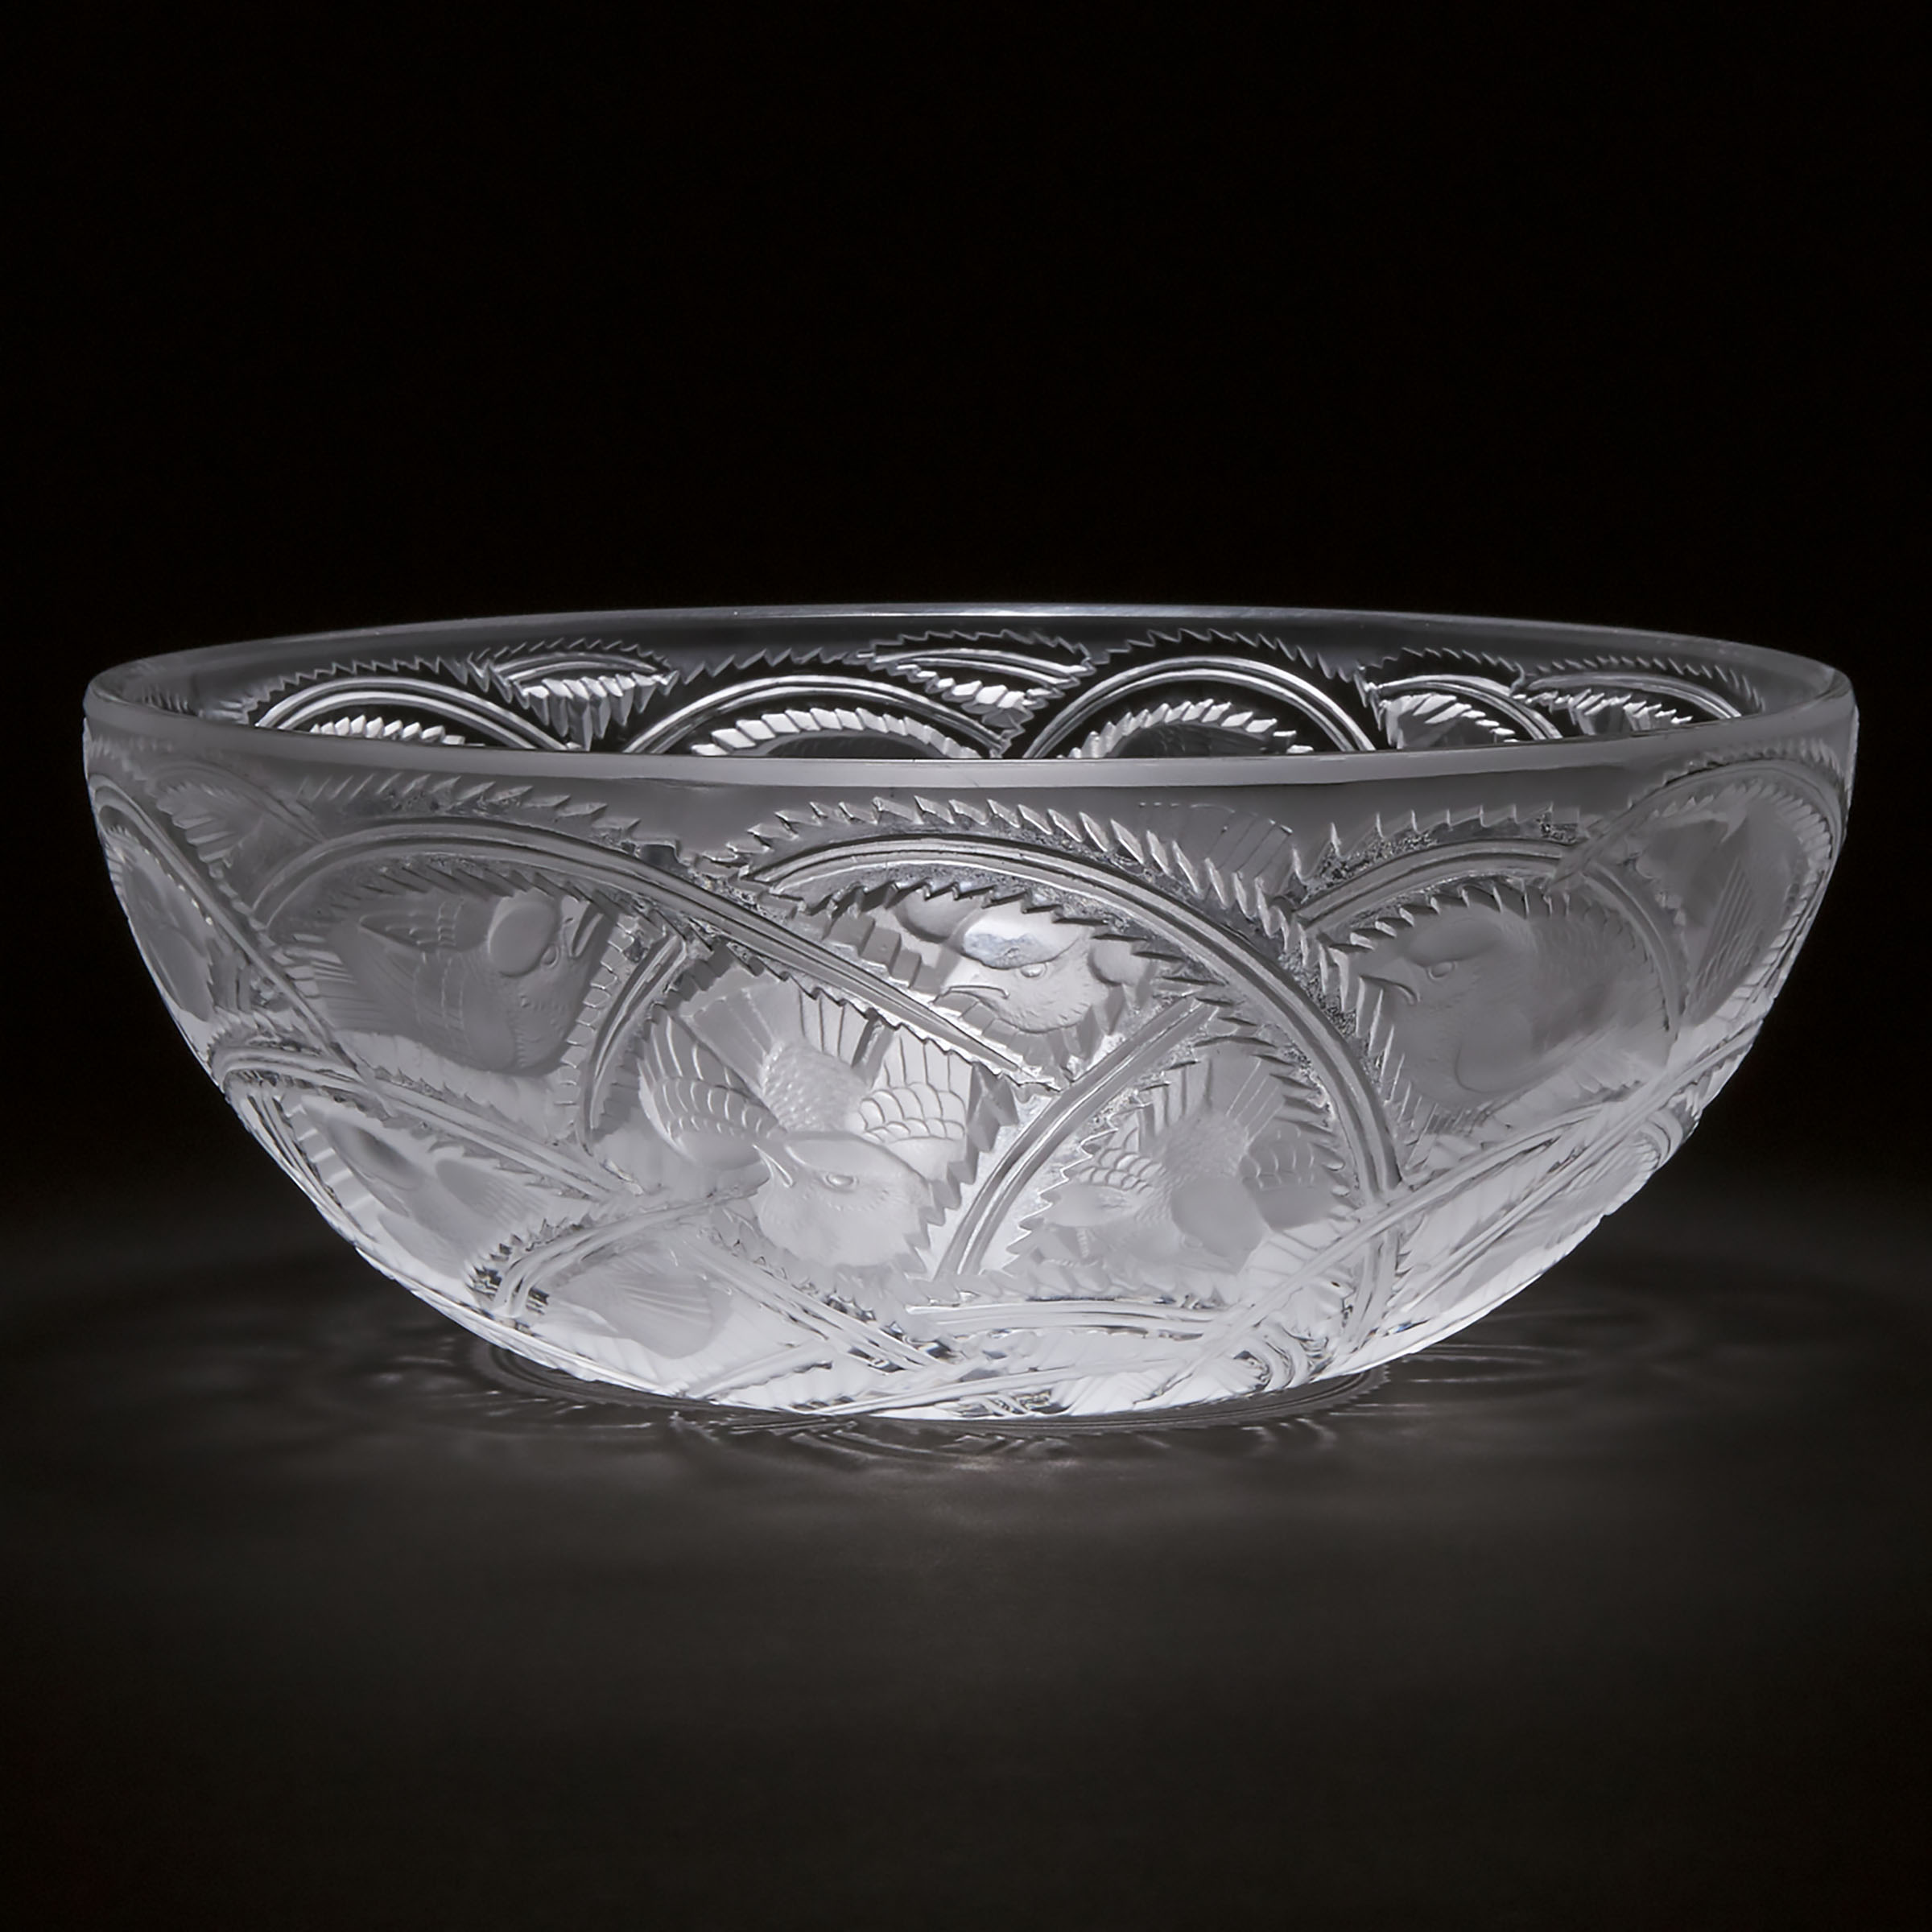  Pinsons Lalique Moulded and 3ac3e0